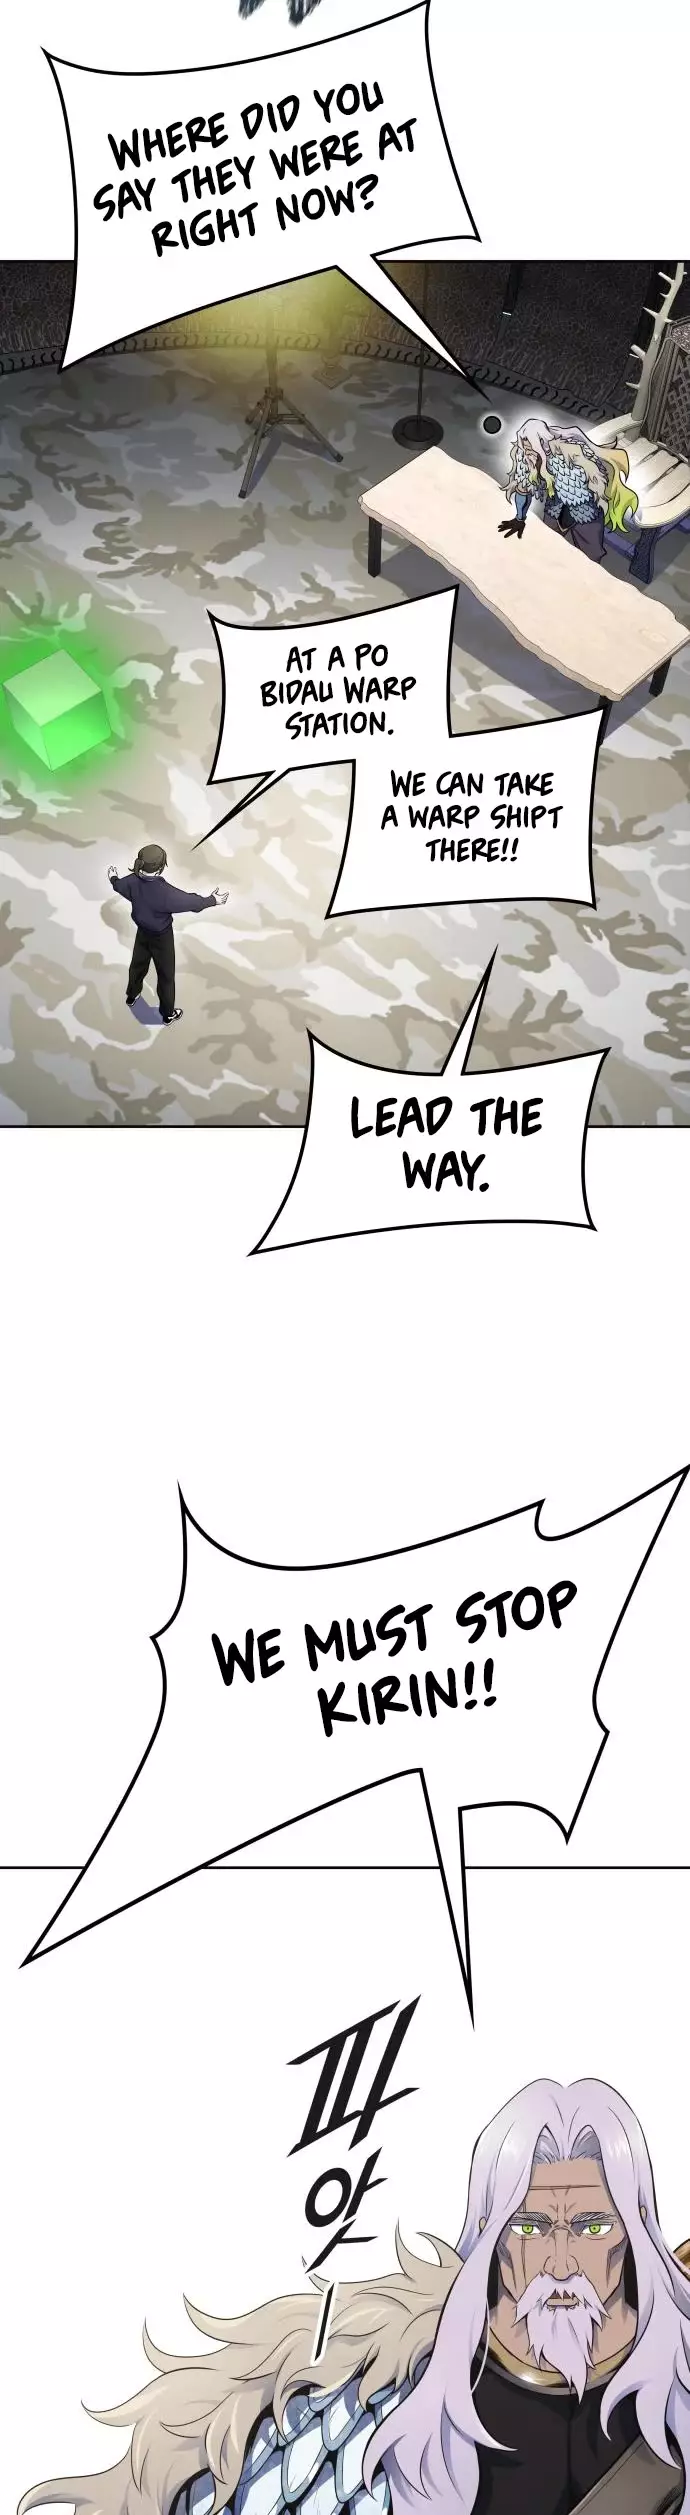 Tower of God - 591 page 81-0520b528